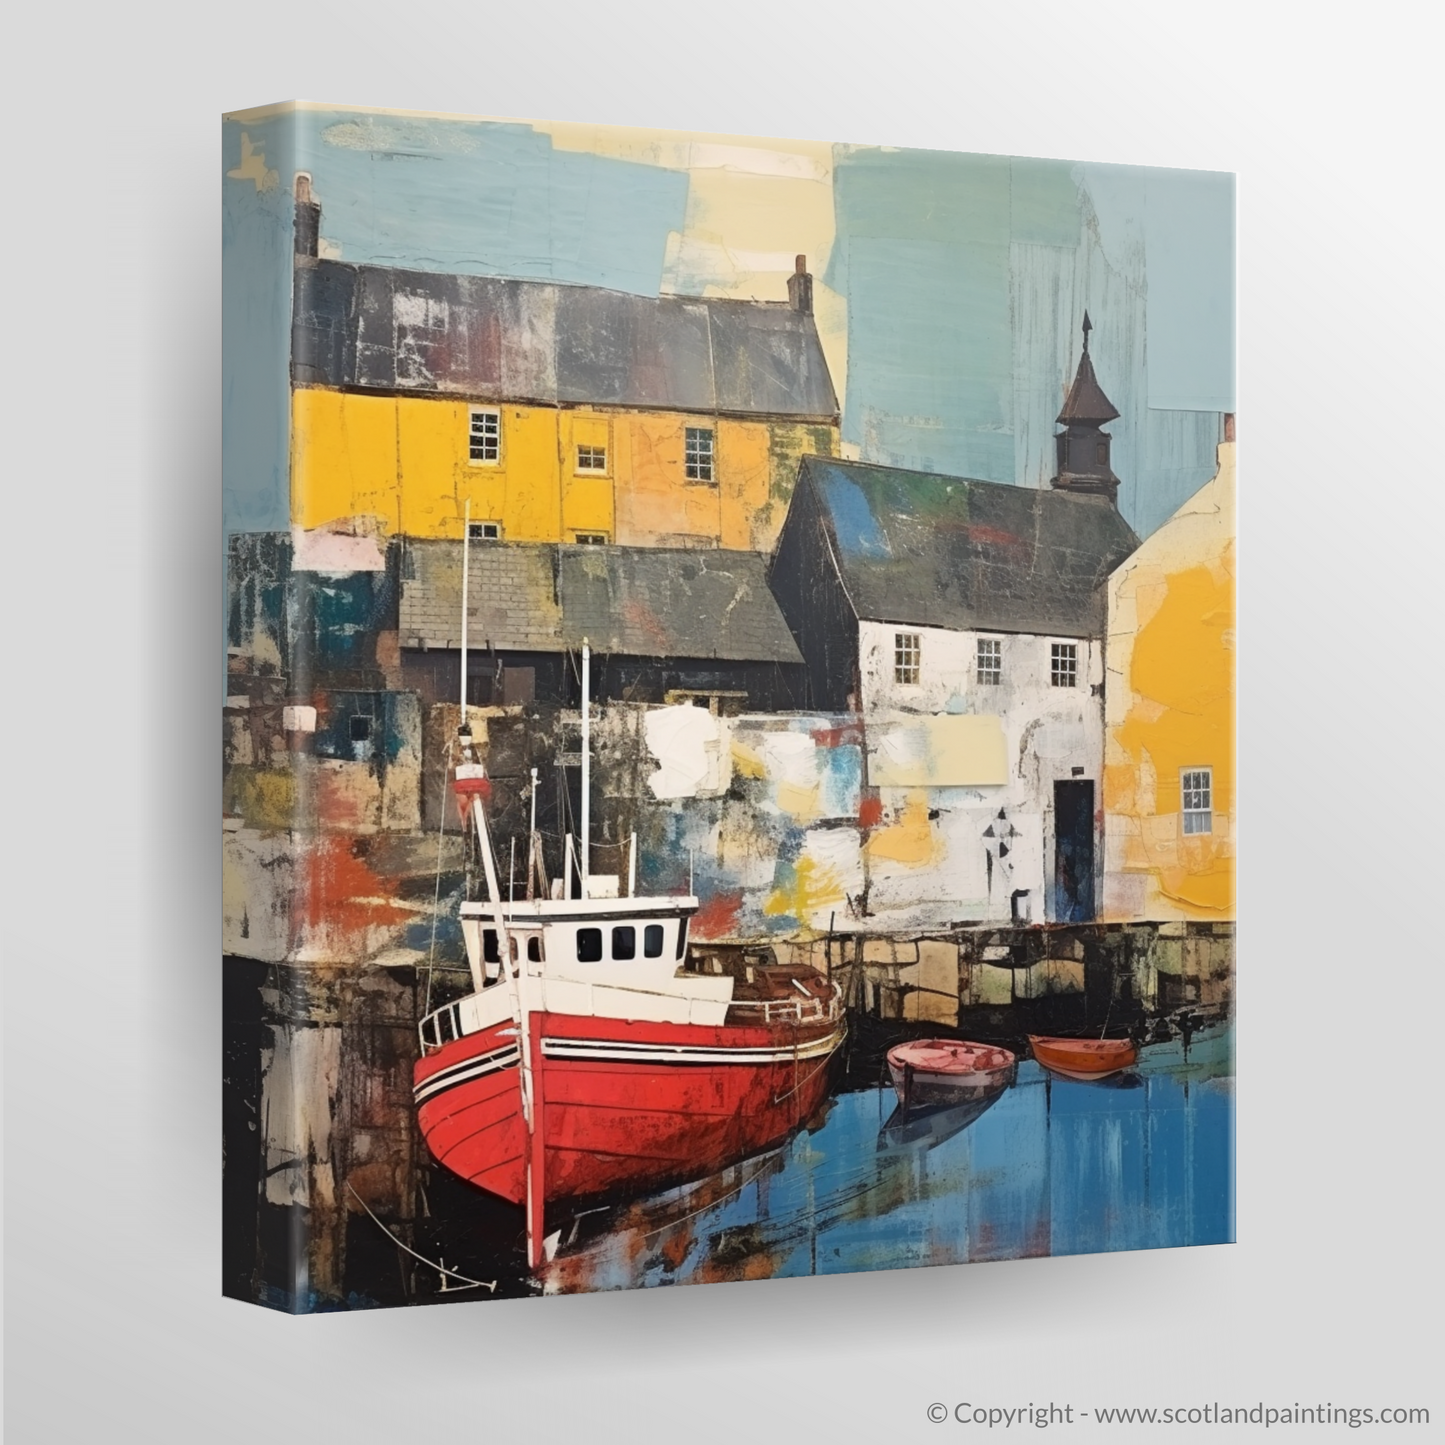 Electric Harbour: A Pop Art Tribute to Stornoway